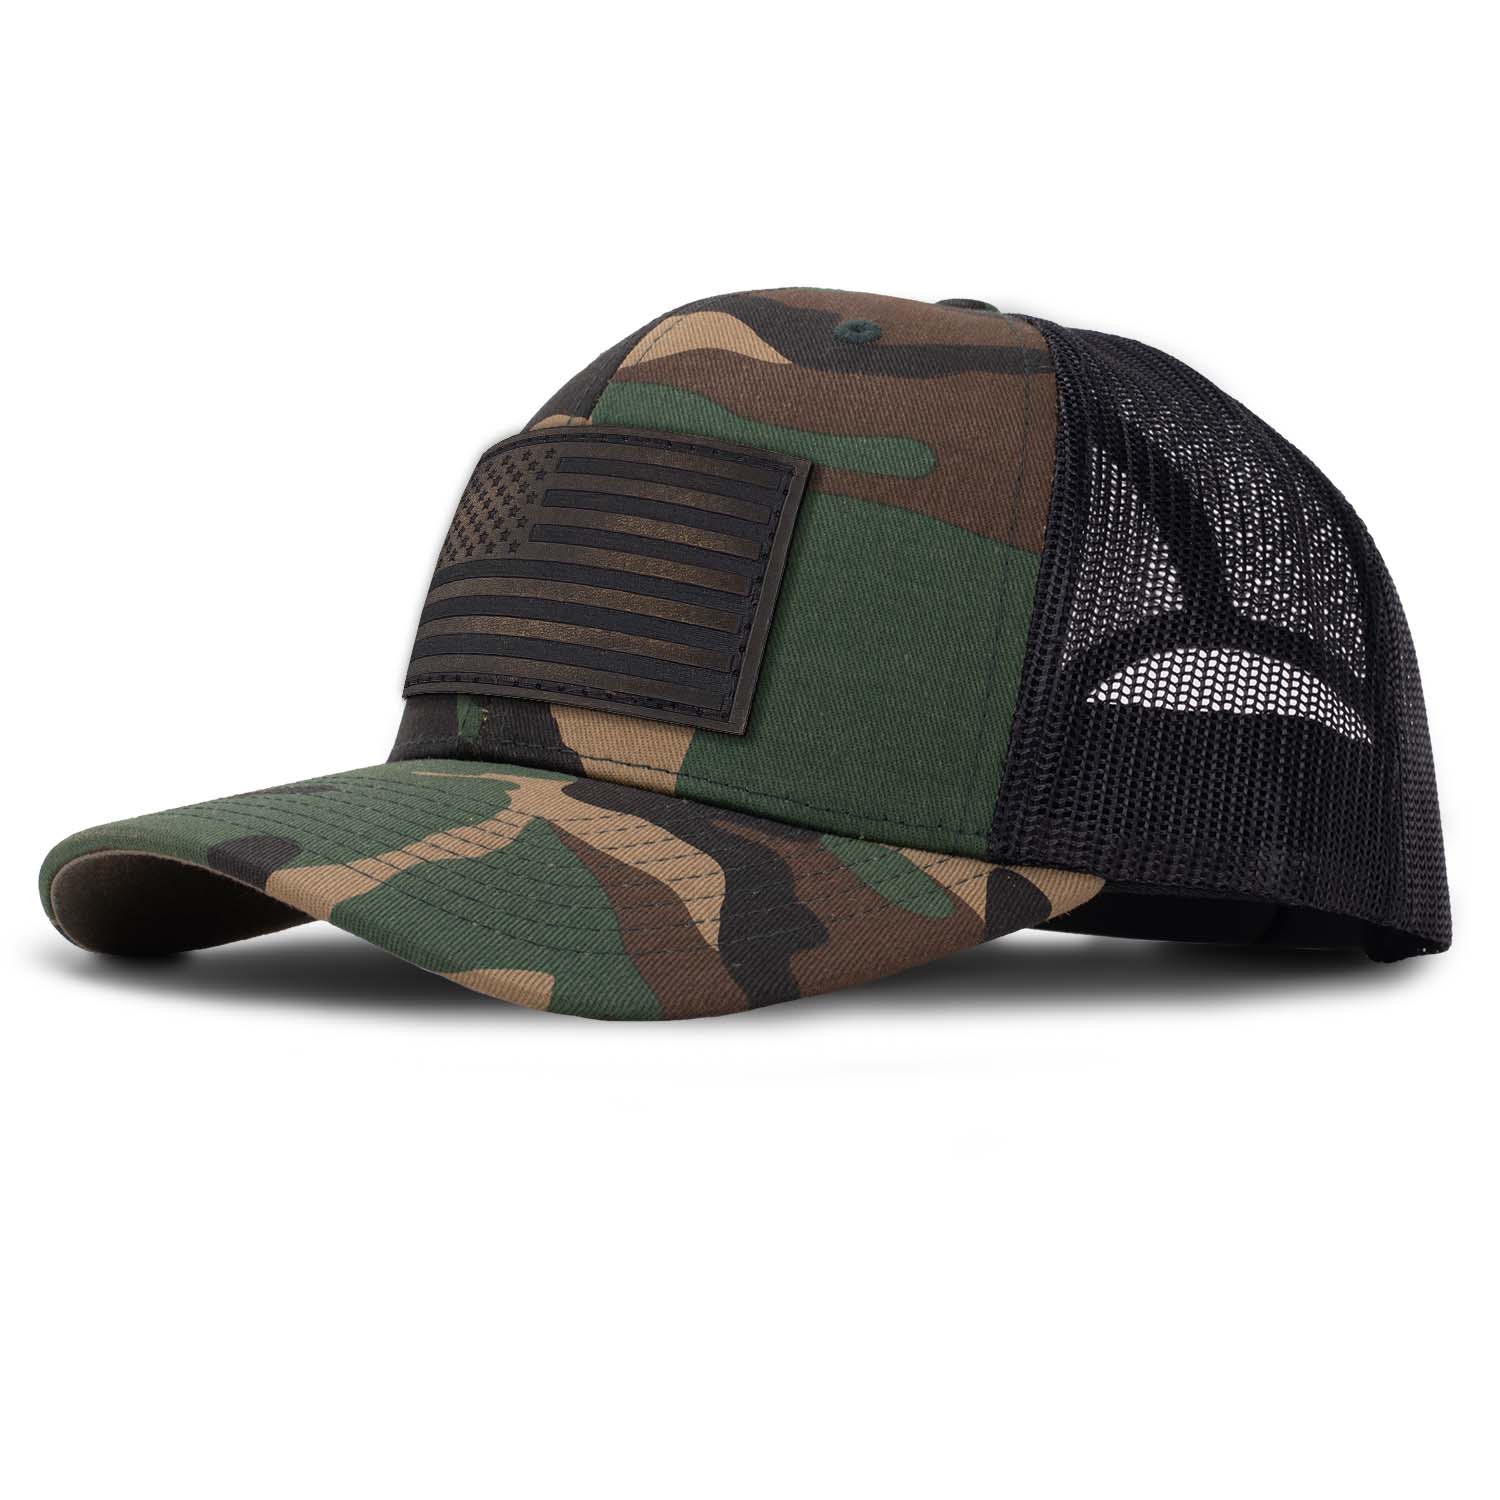 Revolution Mfg classic trucker hat in woodland camo with black mesh with a dark brown full grain leather American flag patch